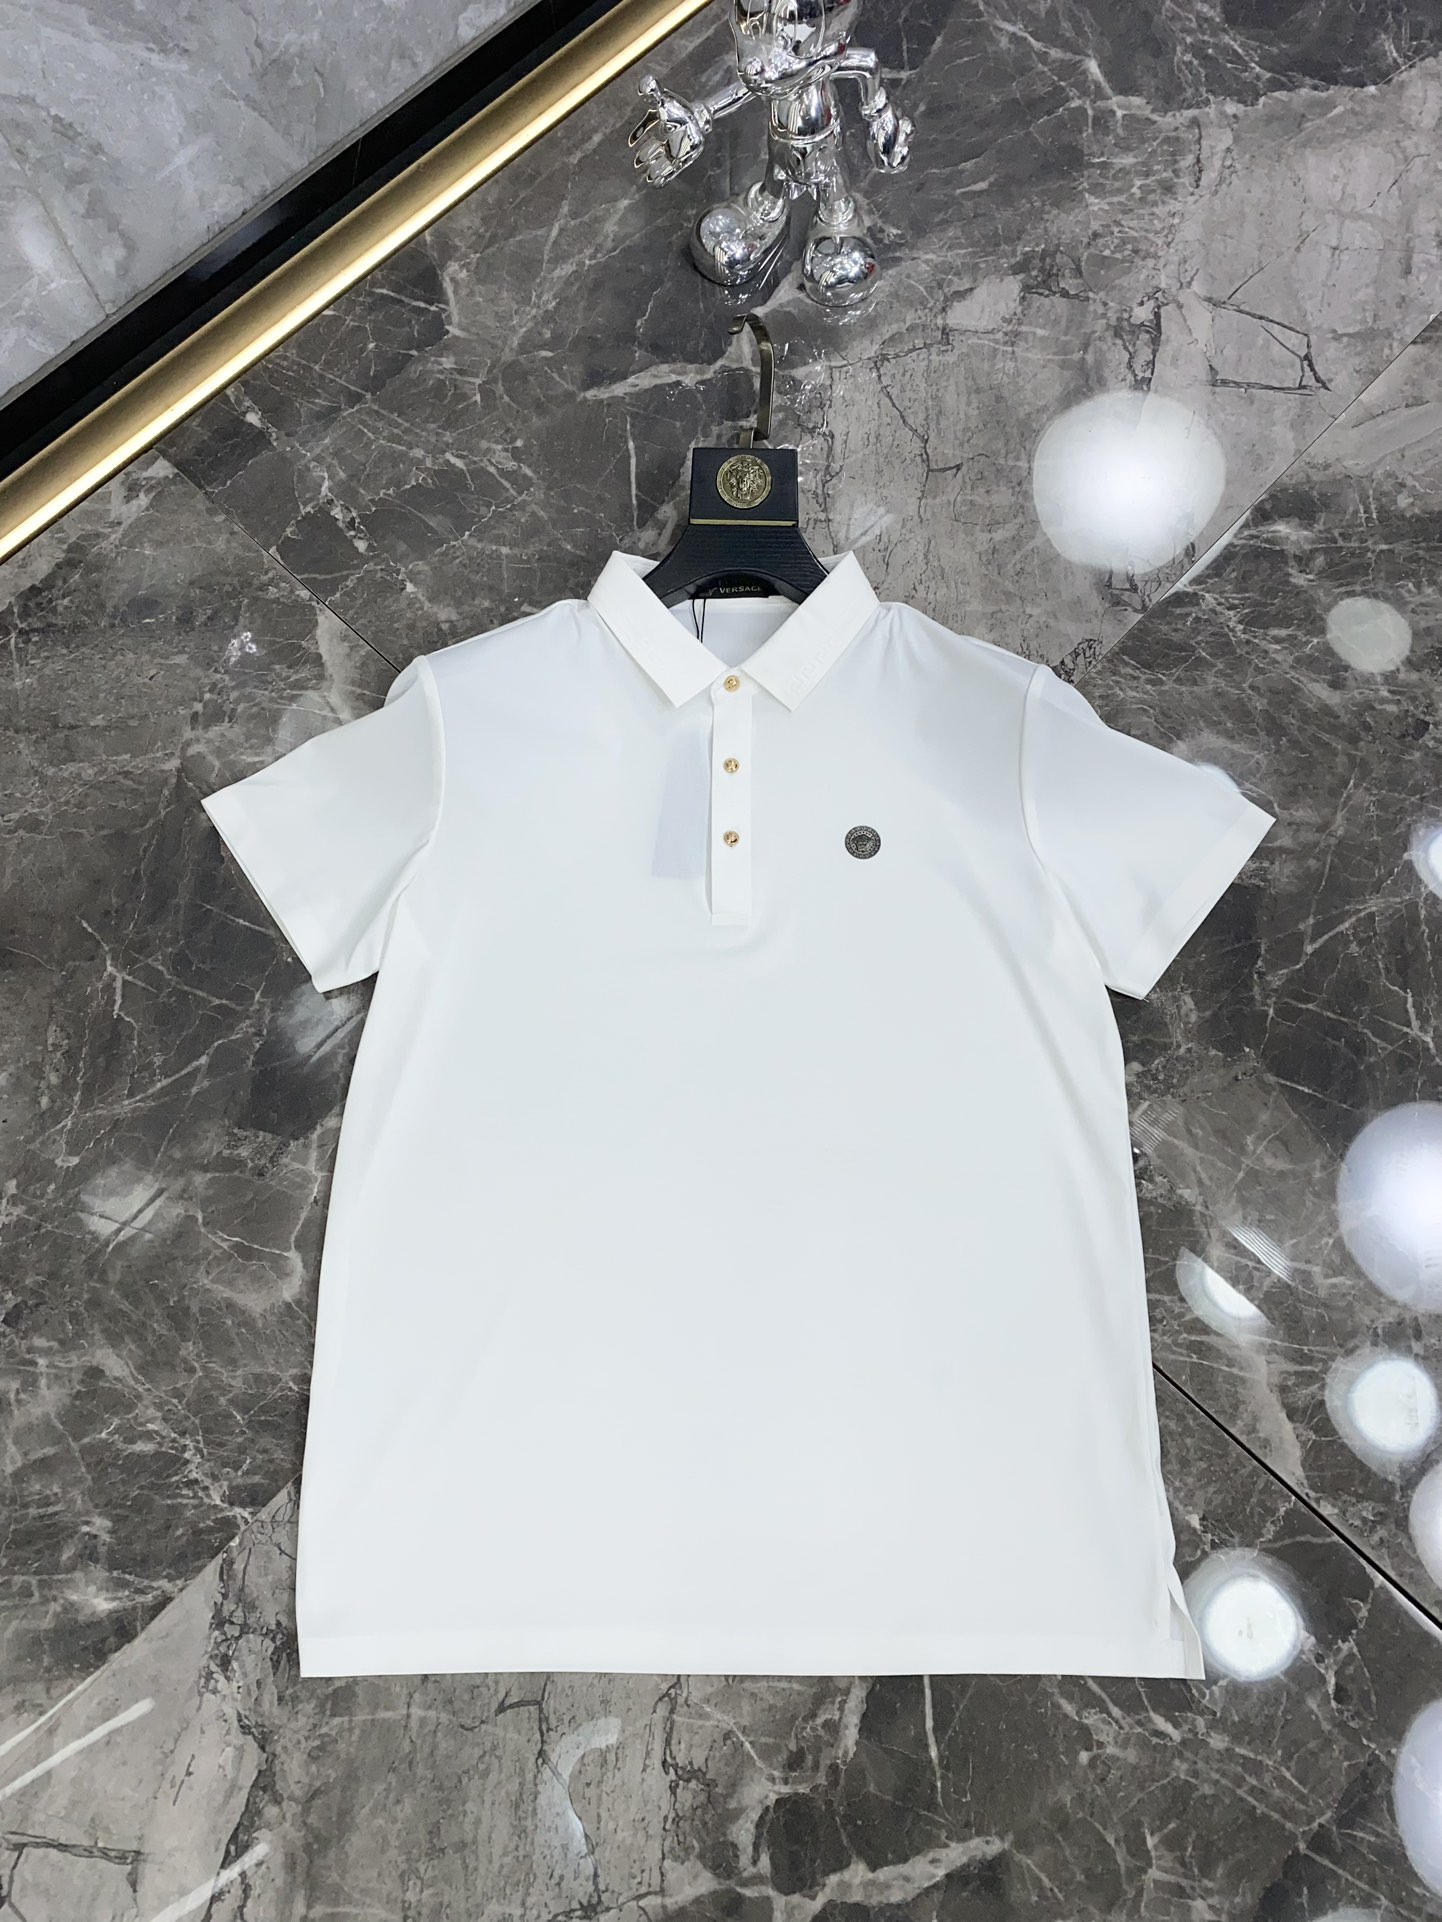 Versace Clothing Polo T-Shirt White Summer Collection Short Sleeve